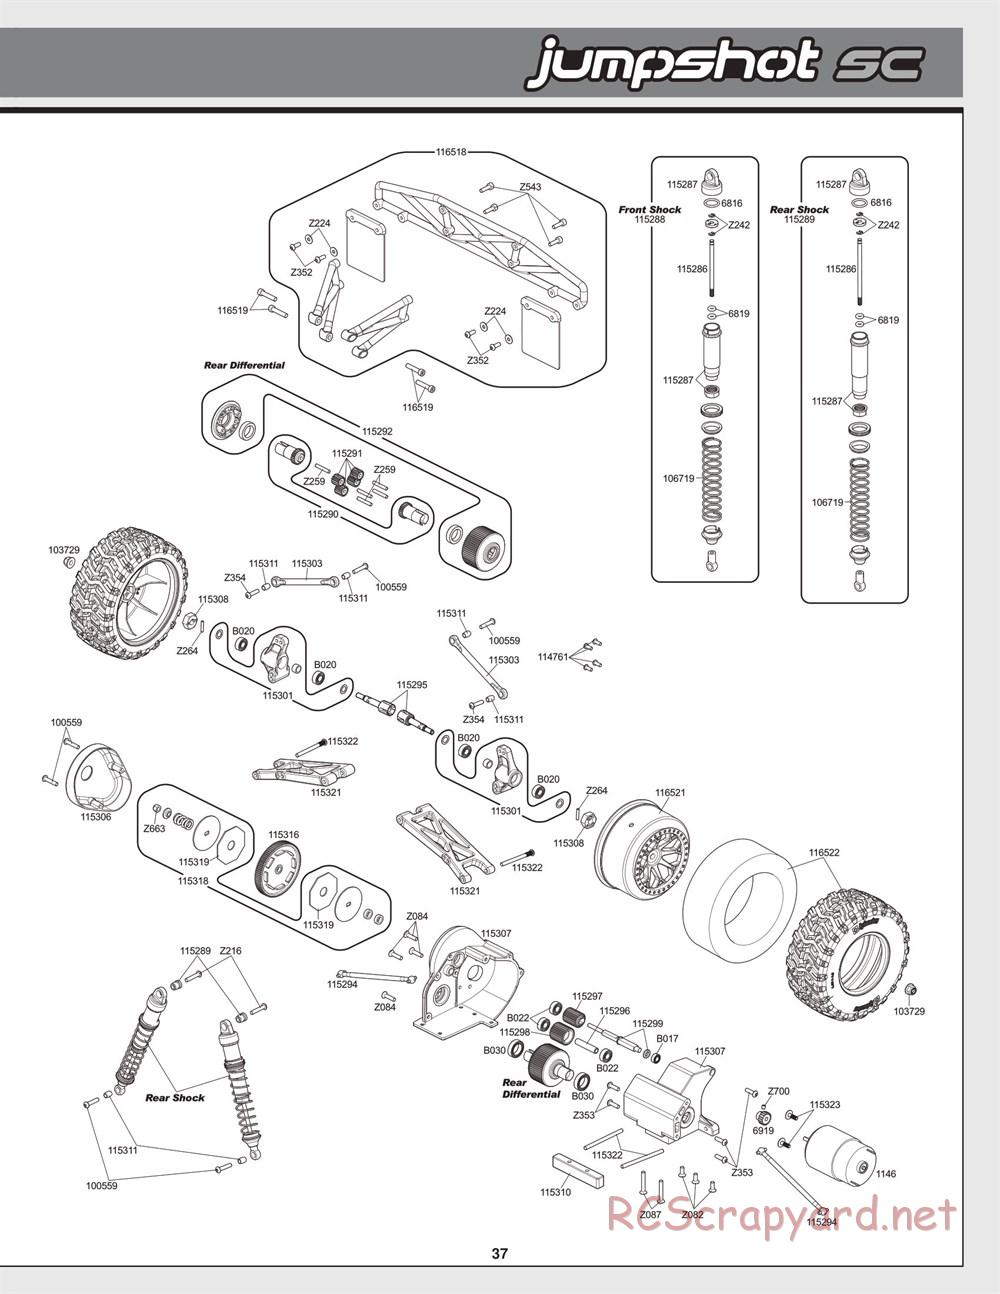 HPI - Jumpshot SC - Exploded View - Page 37